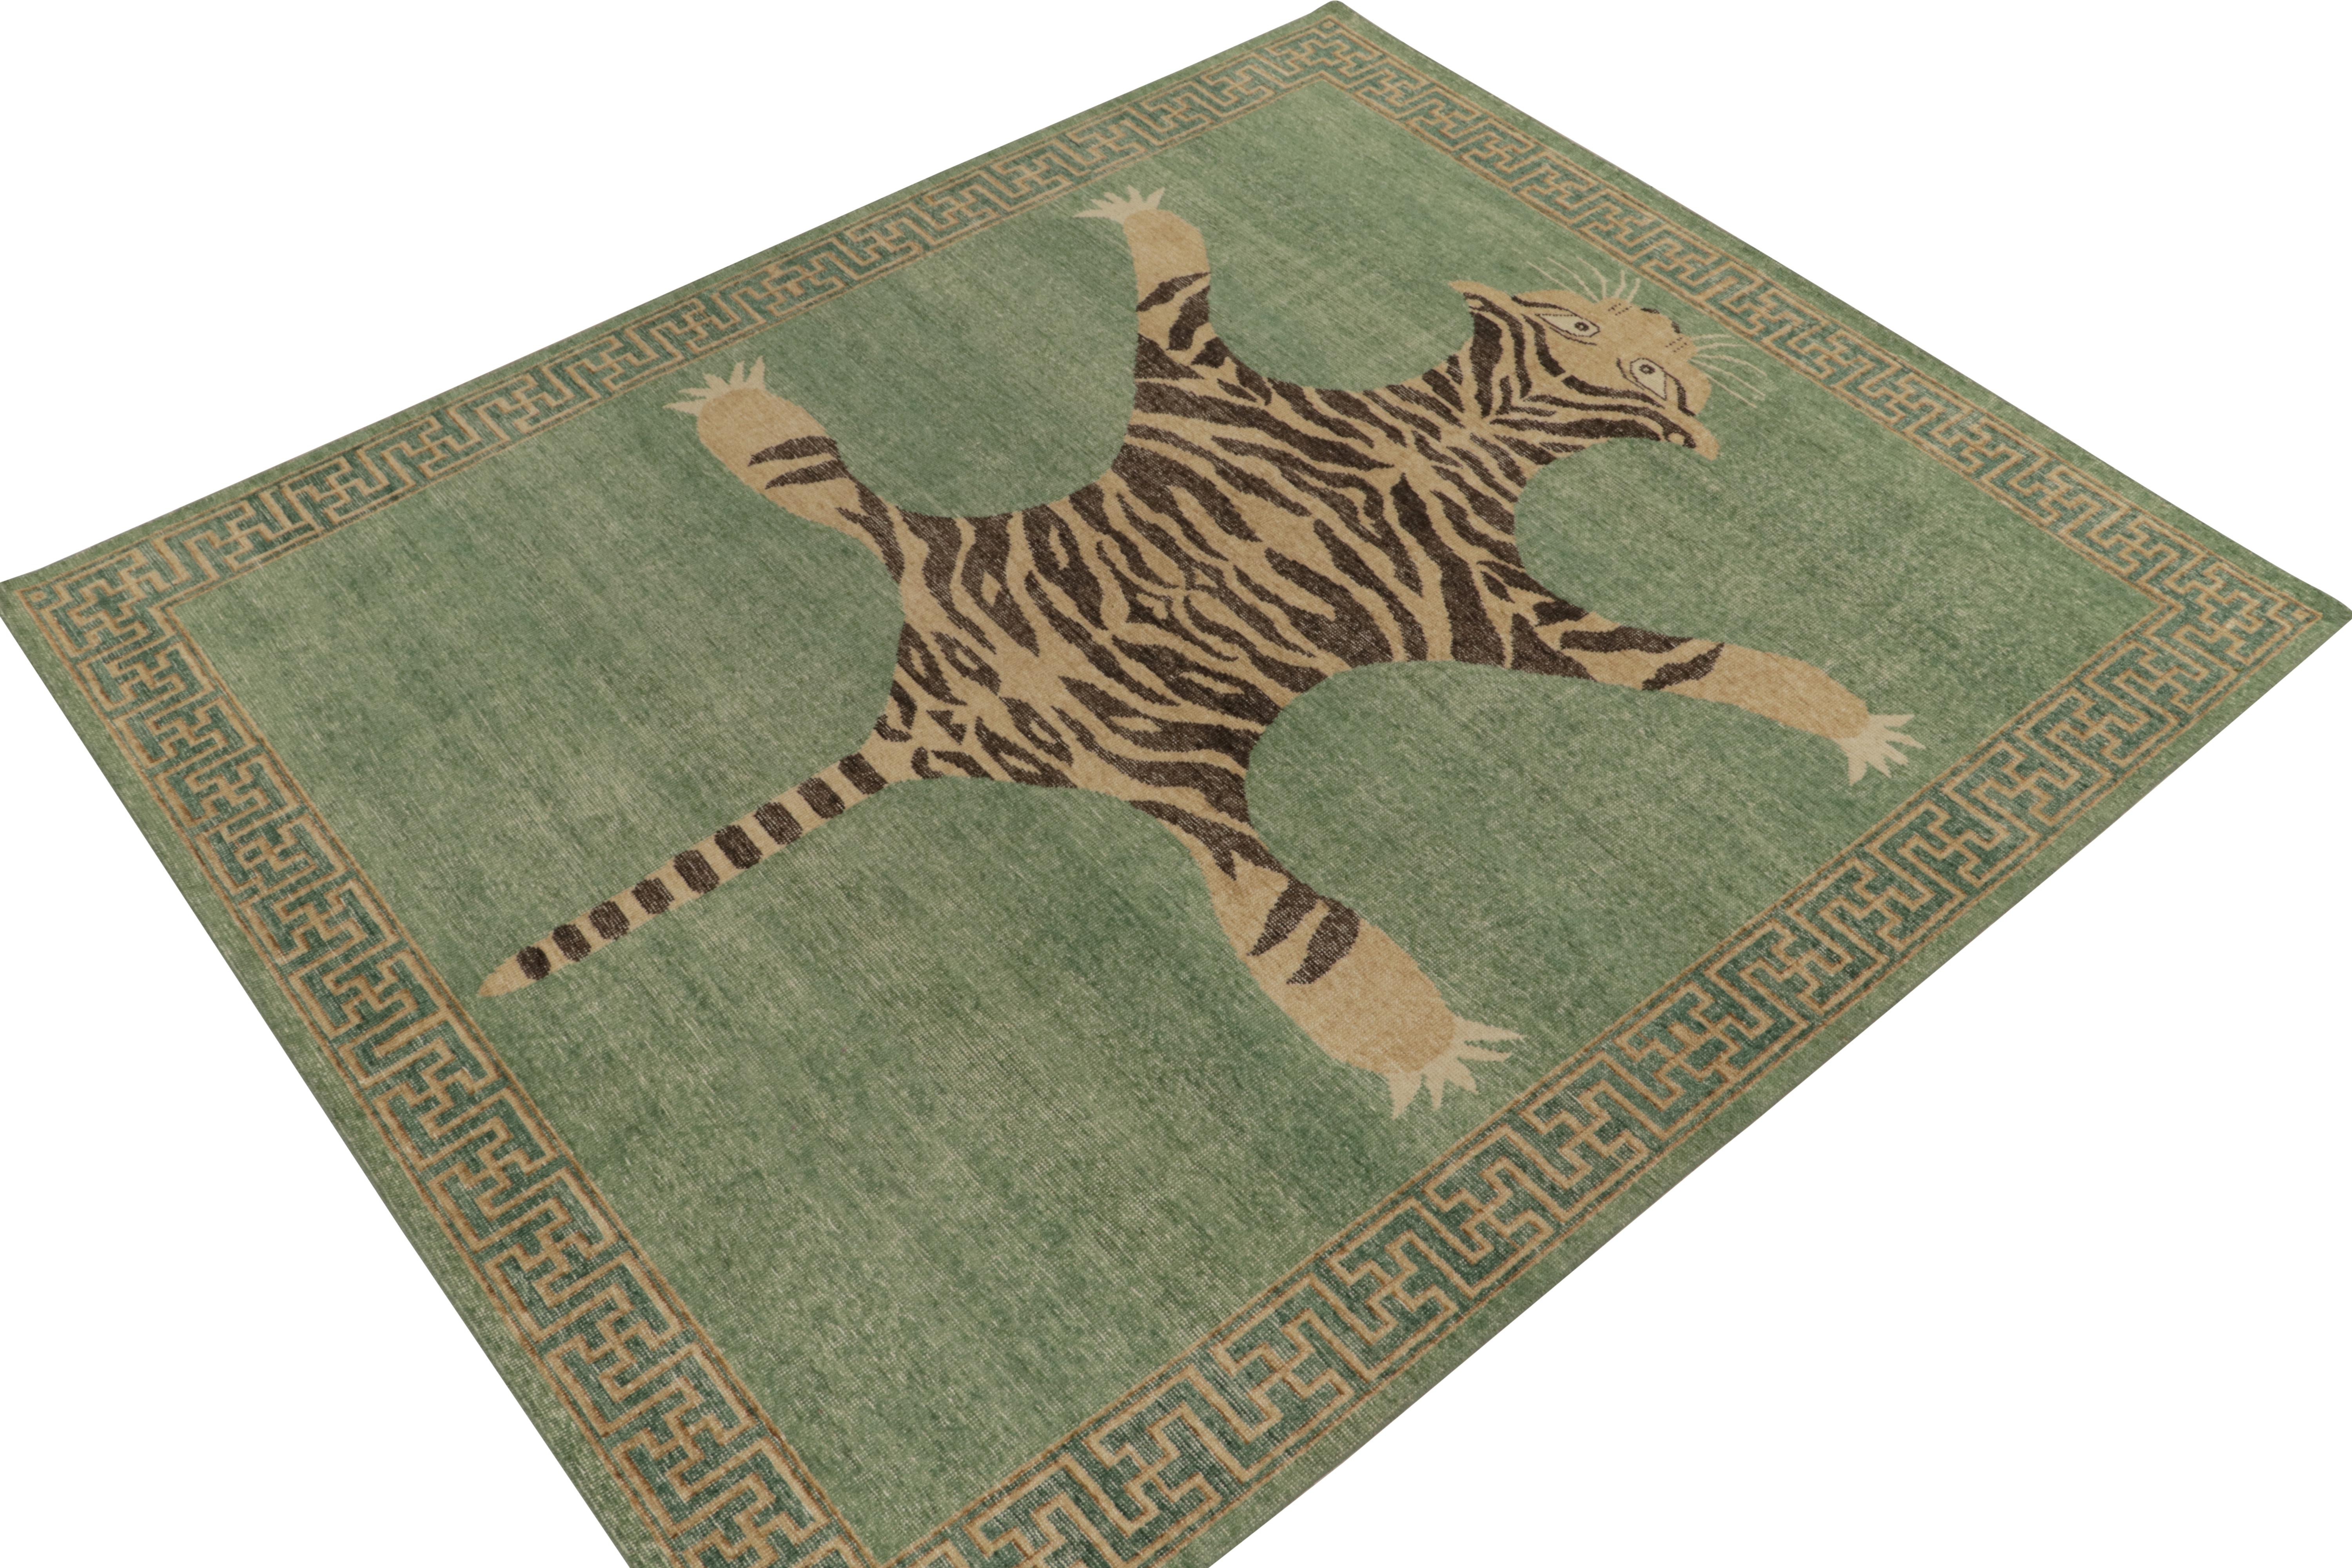 From Rug & Kilim’s Homage Collection, an 8x10 hand-knotted wool piece recapturing the time-honored Tiger skin rug in its glory. 

On the Design: This piece is inspired by antique Indian Tiger-skin rugs of the most regal, inviting presence. Tones